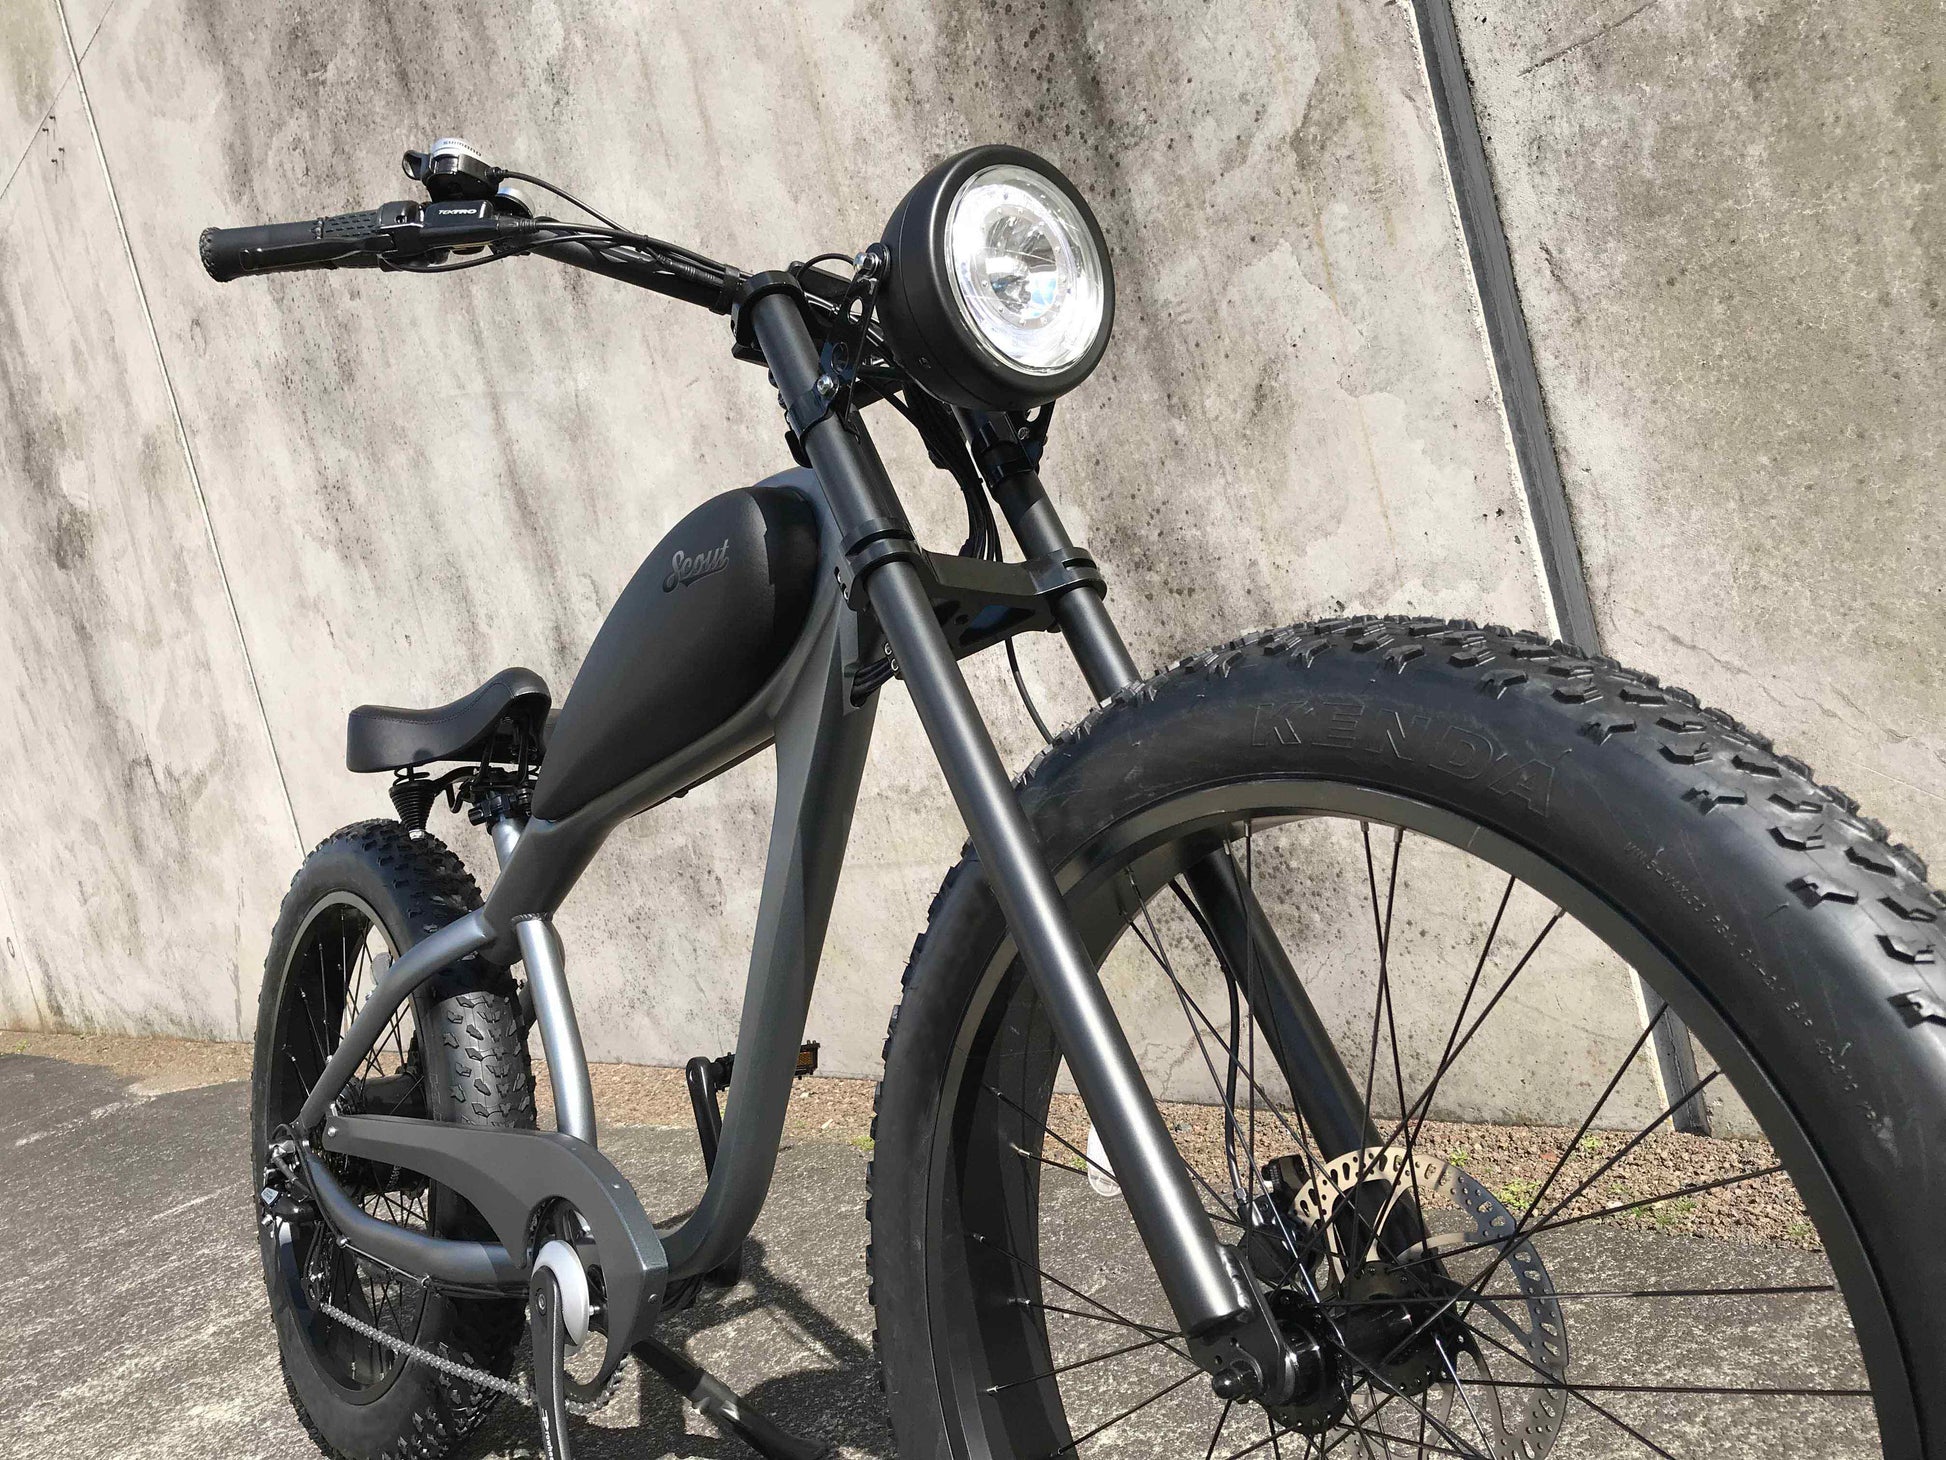 Old school style with a SUPER Comfortable saddle seat. A brand new classic, The Scout Electric Motorbike from Boostbikes 